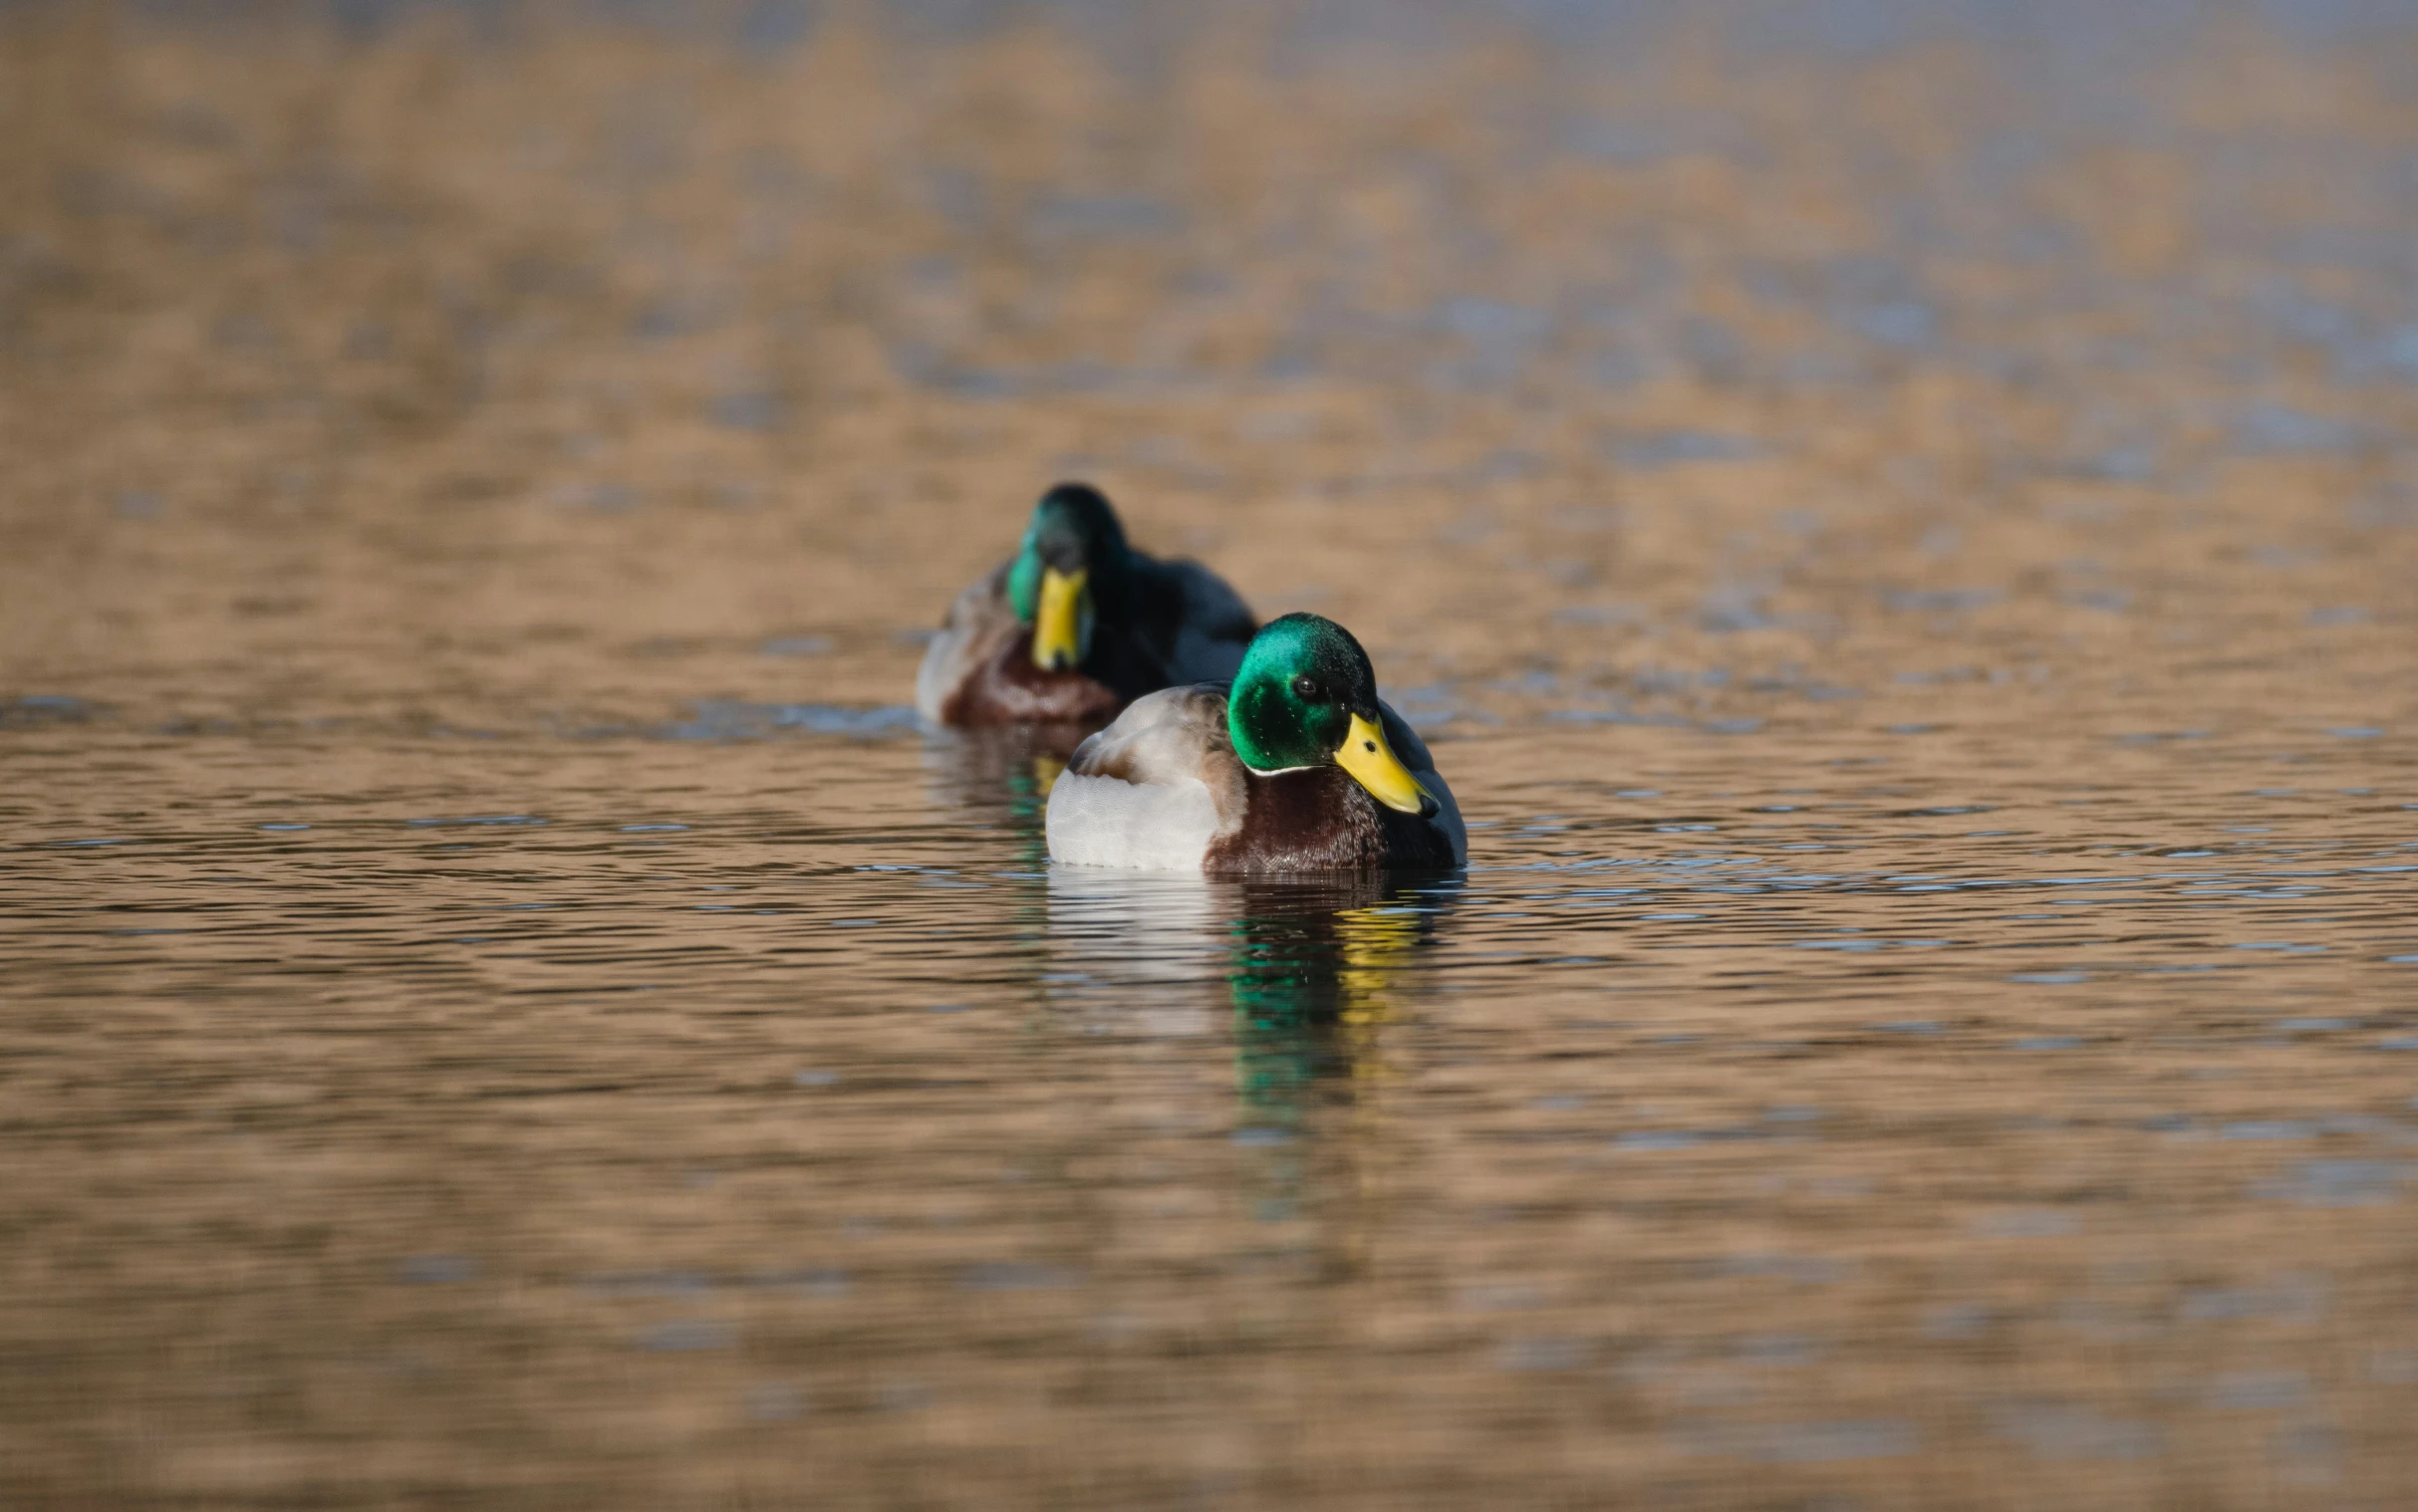 two ducks are swimming across the water together